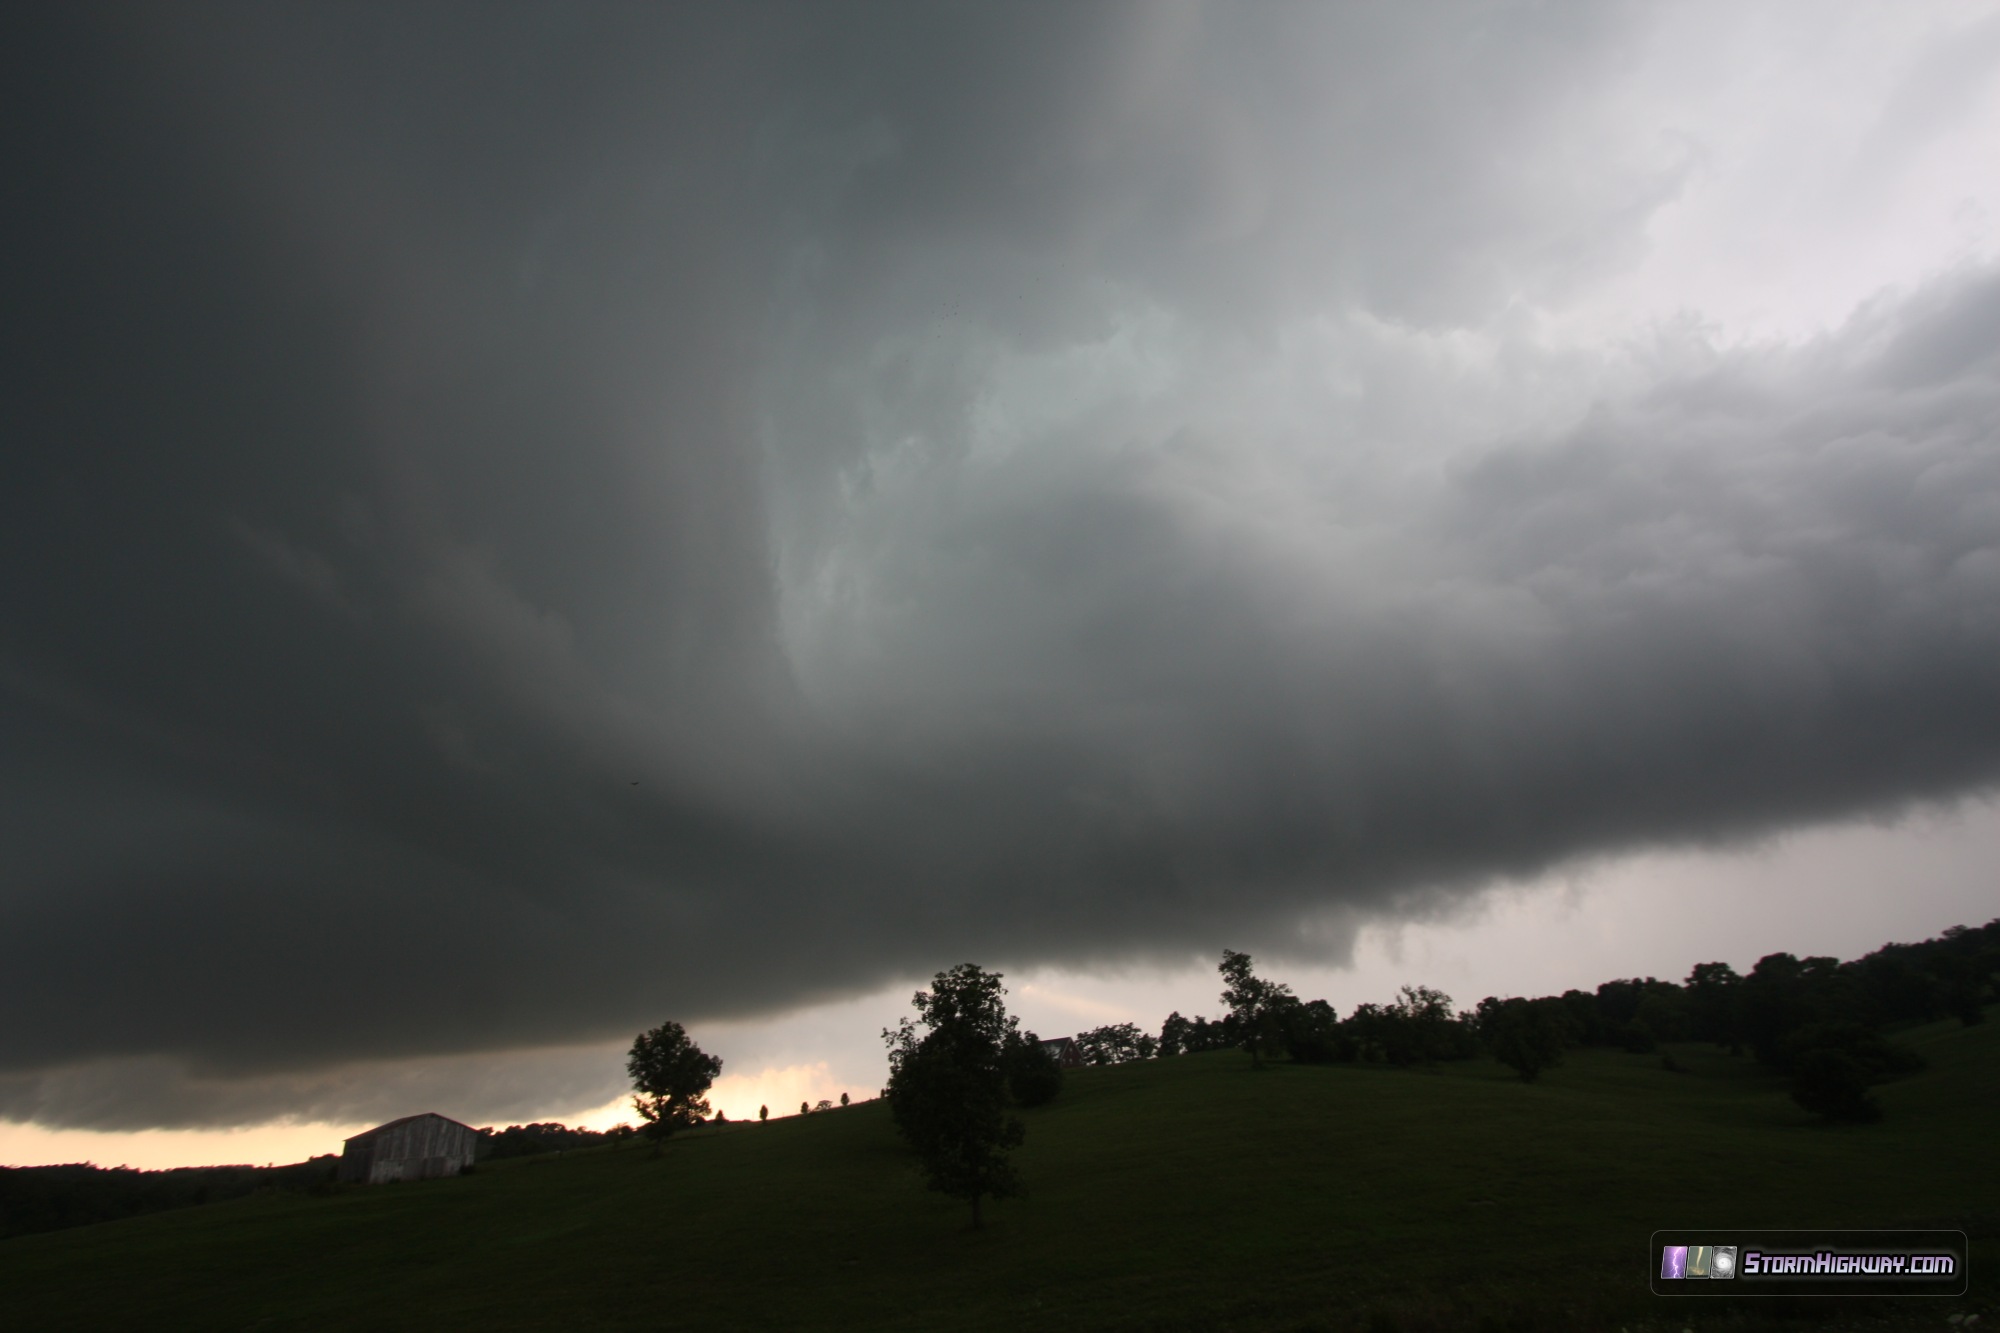 Supercell at Flemingsburg, Kentucky - July 27, 2014